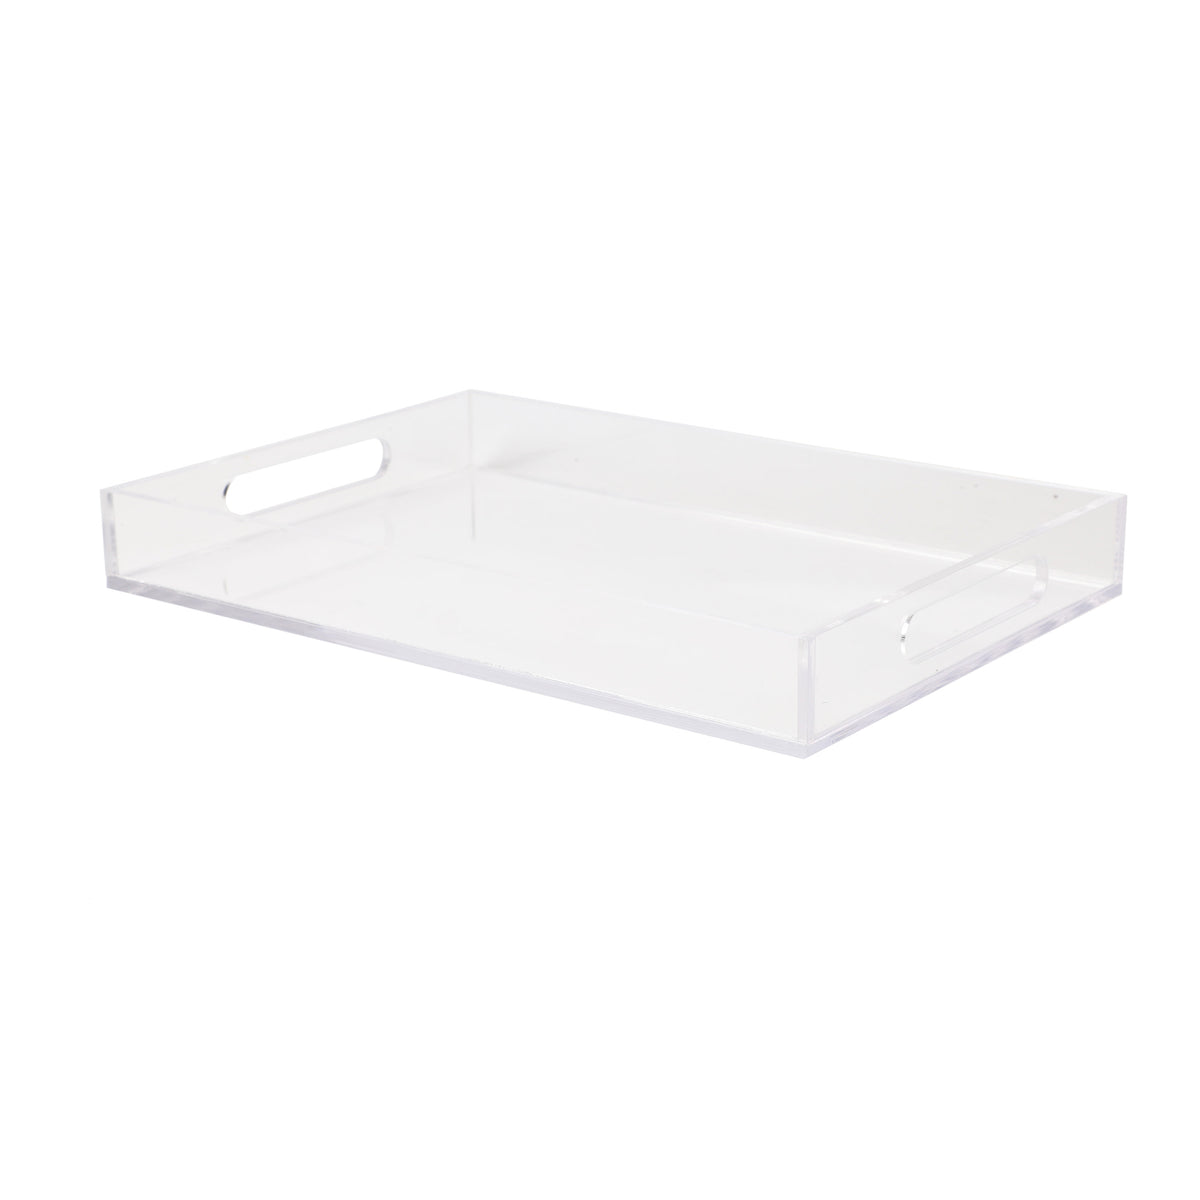 Acrylic Desktop Letter Tray Organizer with Handles and Anti-Slip Feet-Clear